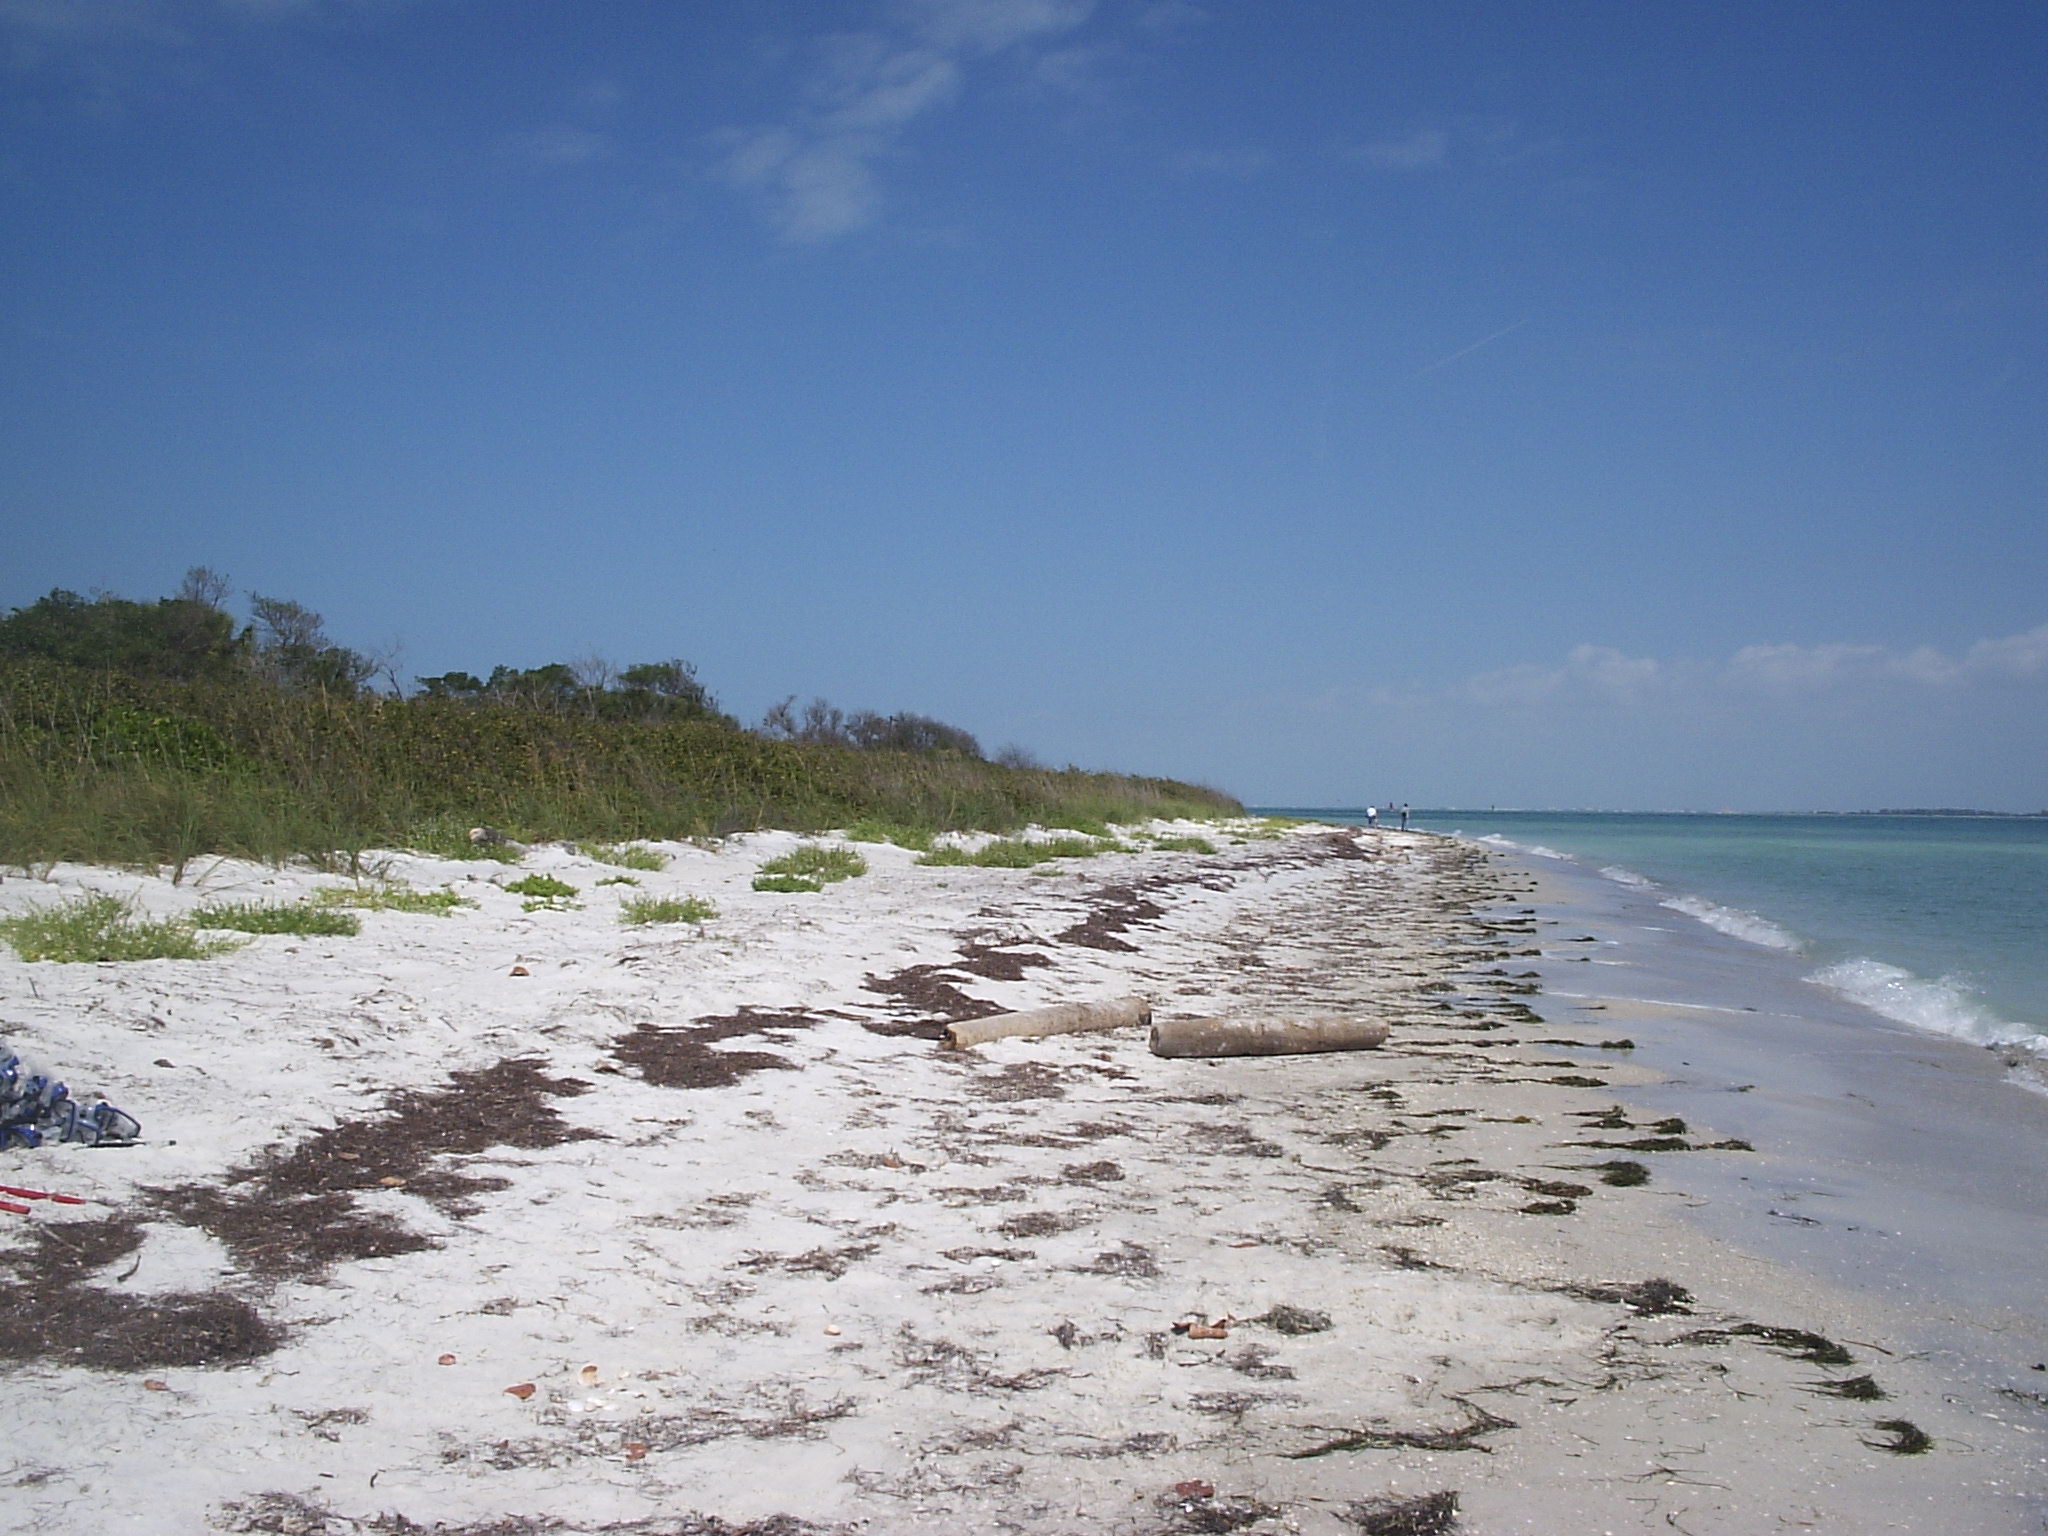 looking north along eastern beach of Egmont Key)